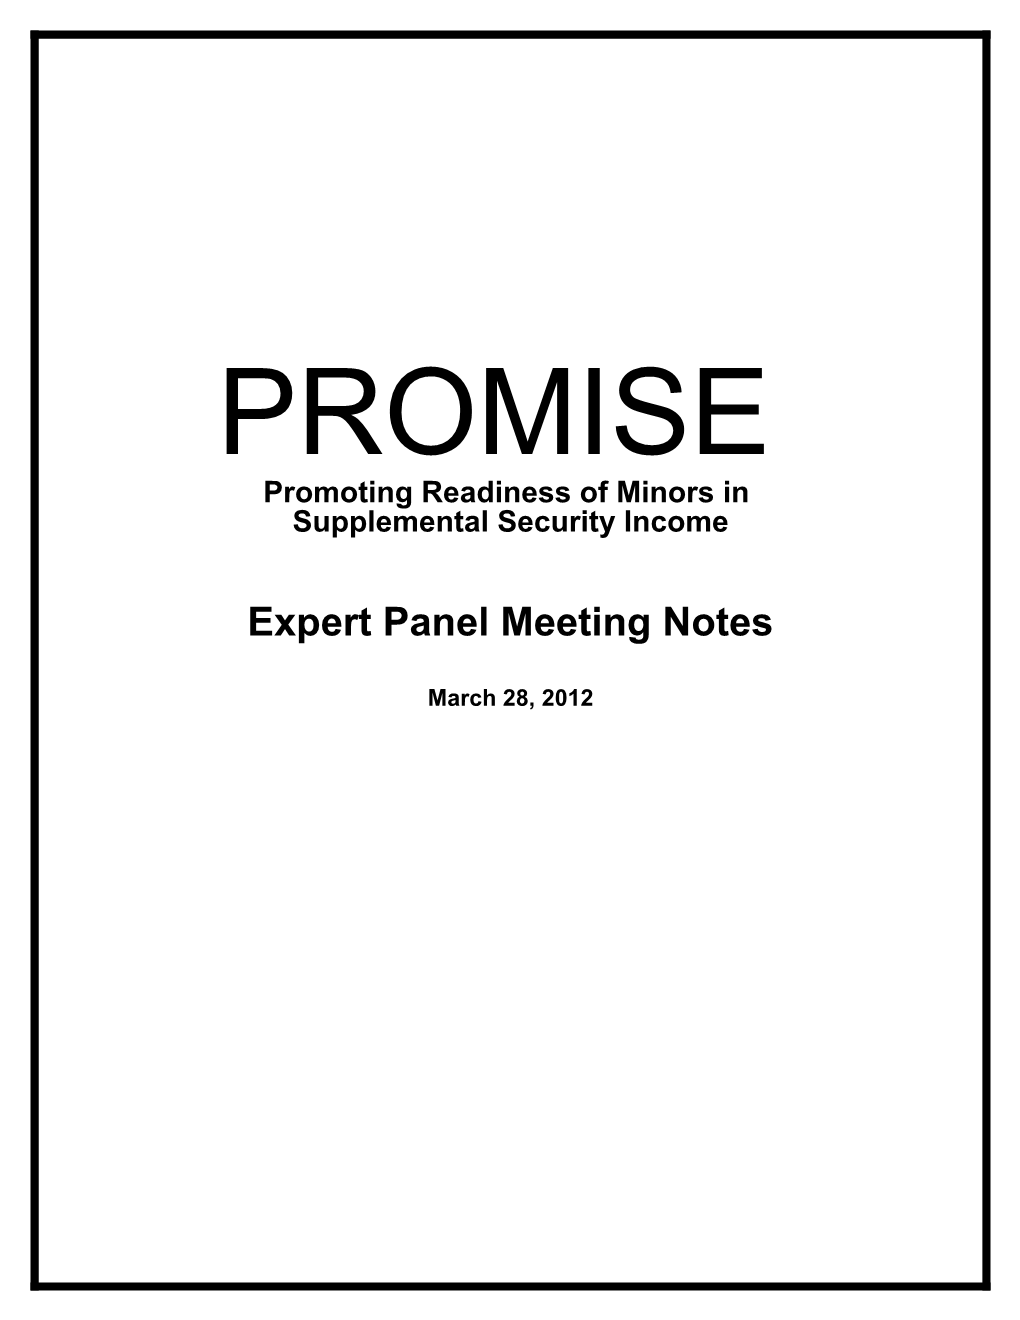 PROMISE: Promoting Readiness of Minors in Supplemental Security Income Expert Panel Meeting